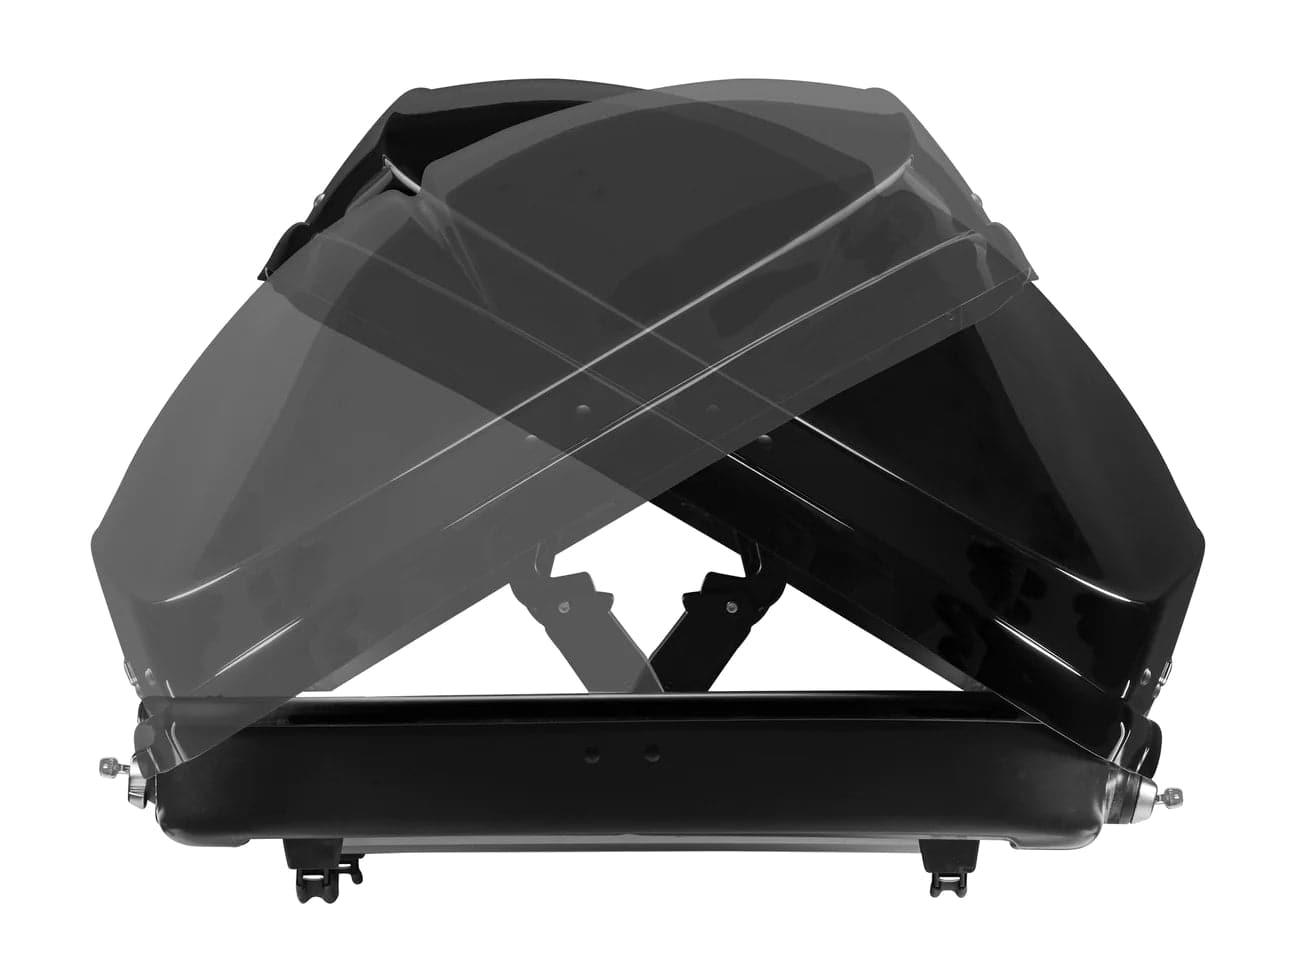 Featuring the GrandTour 18 cargo box manufactured by Yakima shown here from a fifth angle.